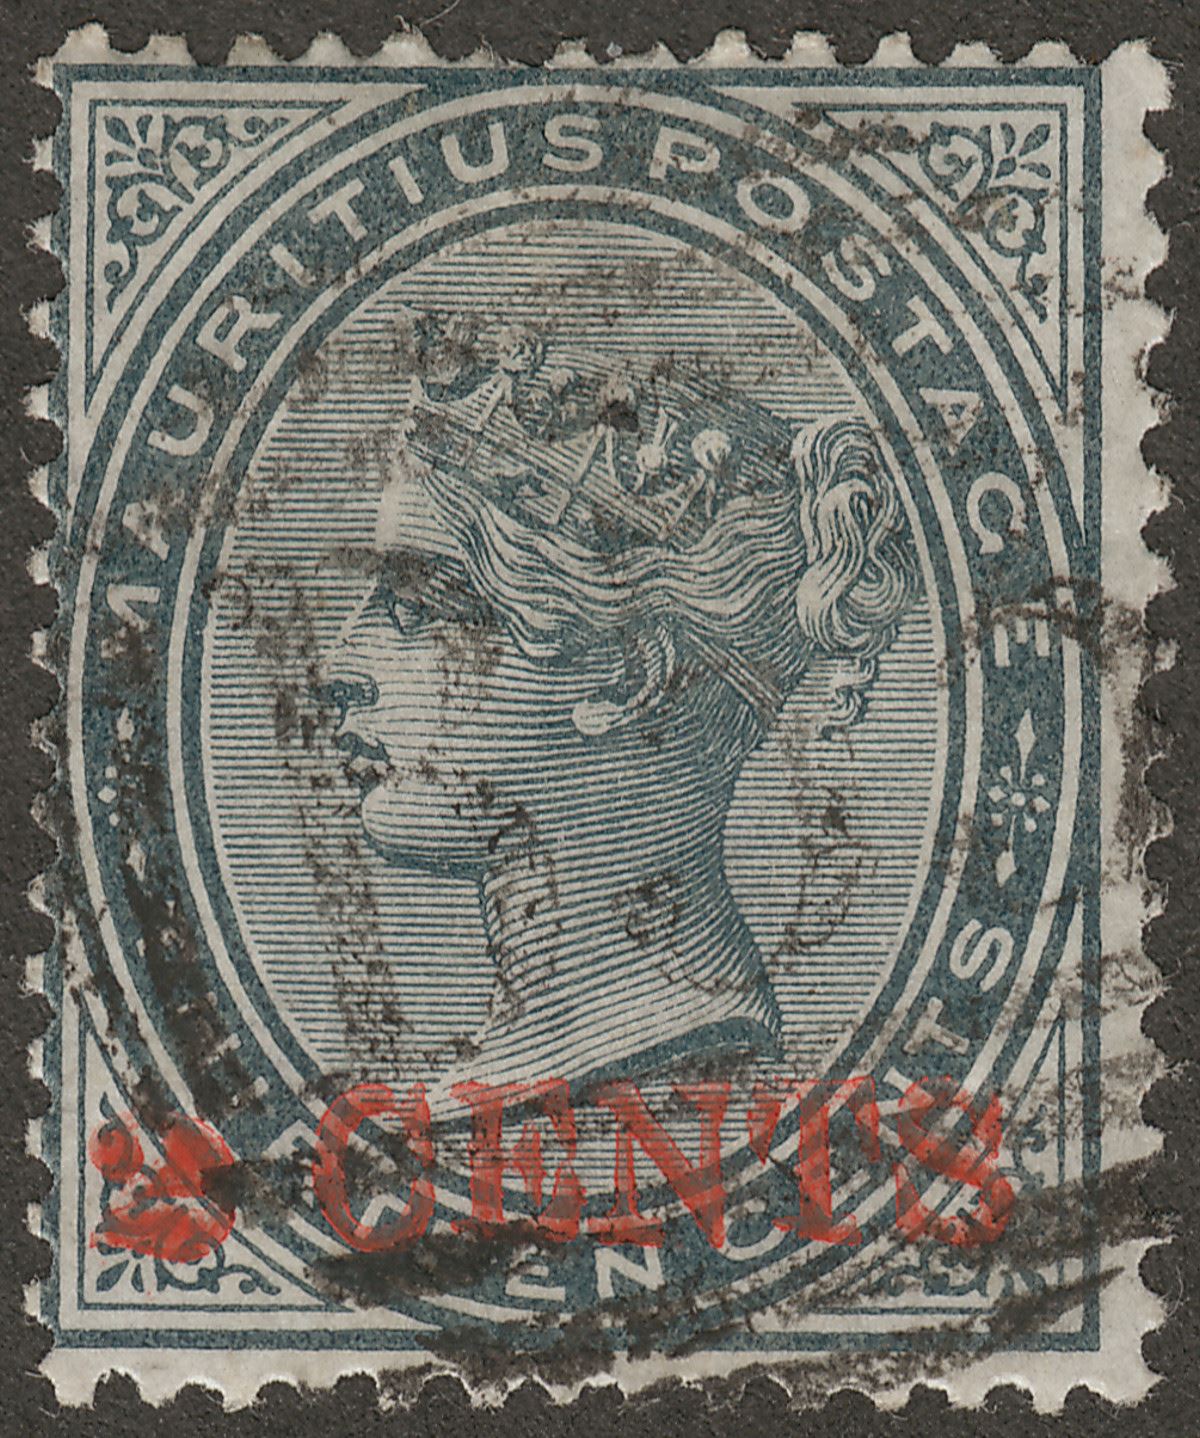 Mauritius 1887 QV 2c on 13c Slate Surcharge Used SG117 cat £120